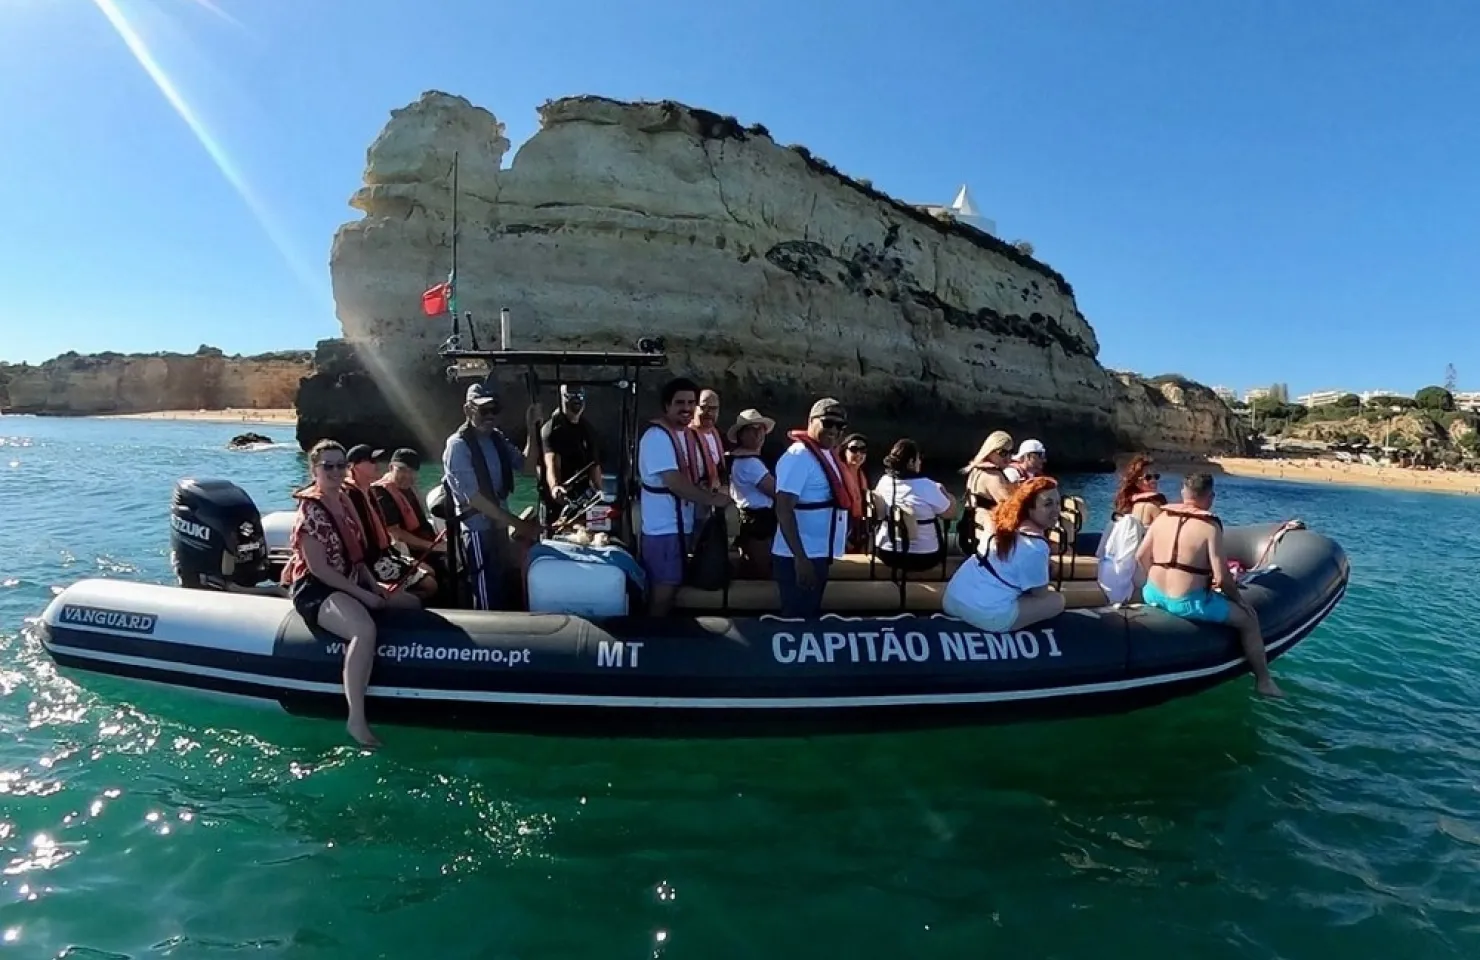 Capitan Nemo Dolphin Watching - Portimao top activities and things to do.